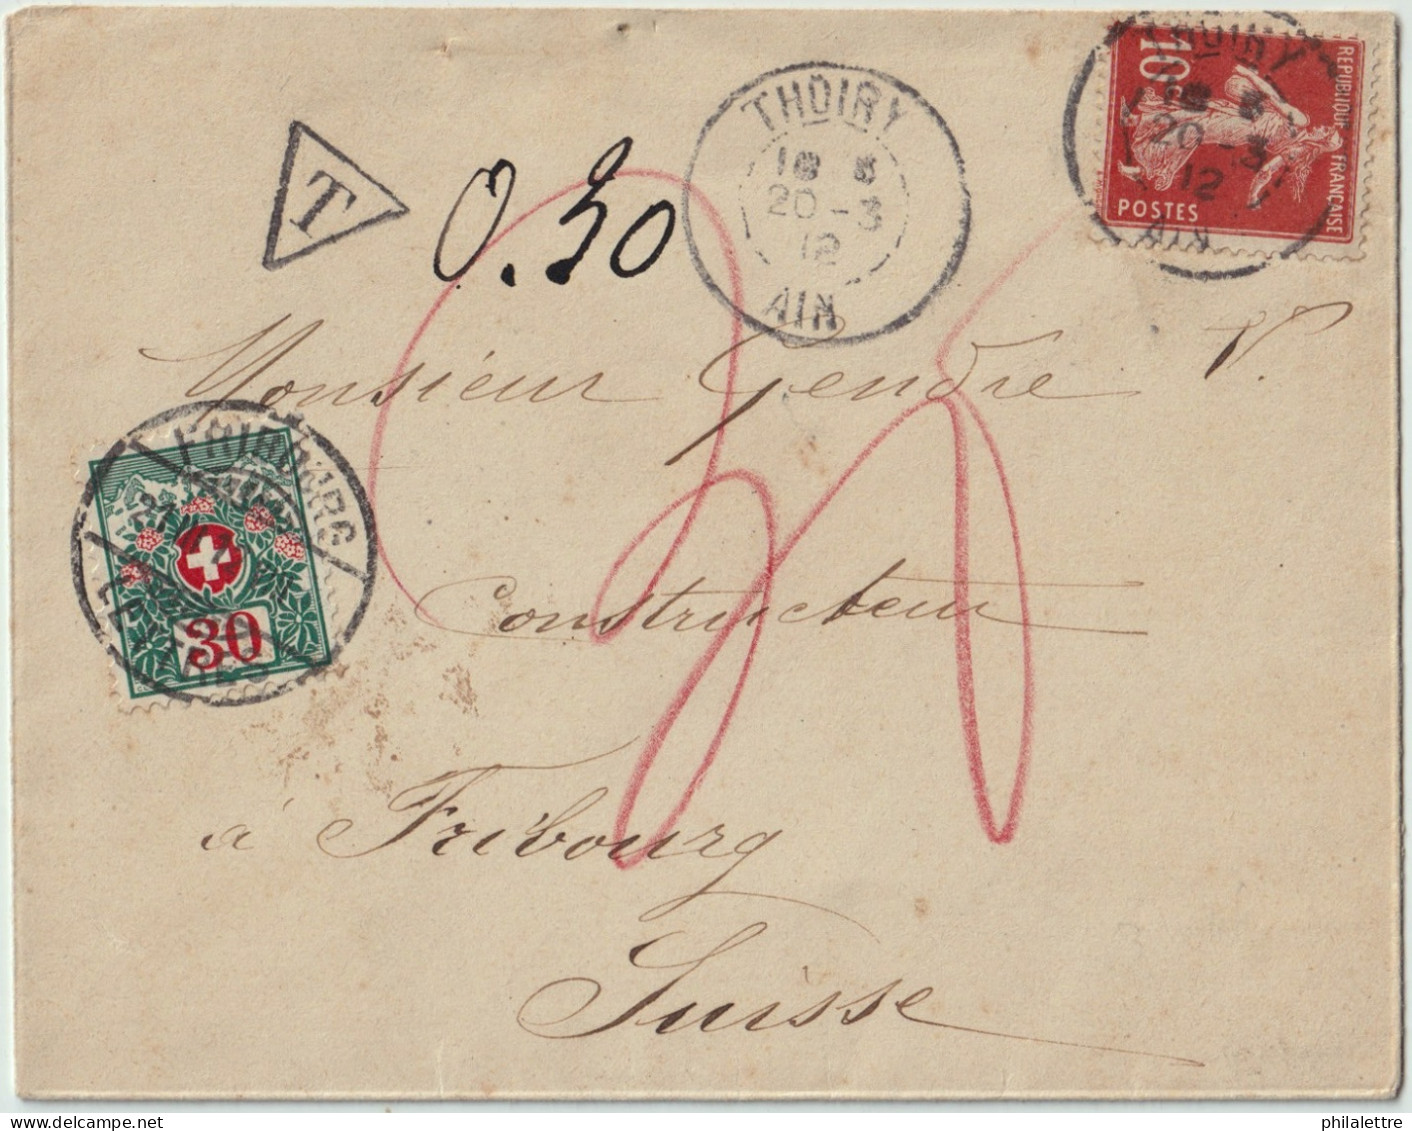 SUISSE / SWITZERLAND 1912 Cover From France To FRIBOURG Franked 10c Instead Of 25c Taxed 0fr30 With Postage Due Mi.36 - Postage Due